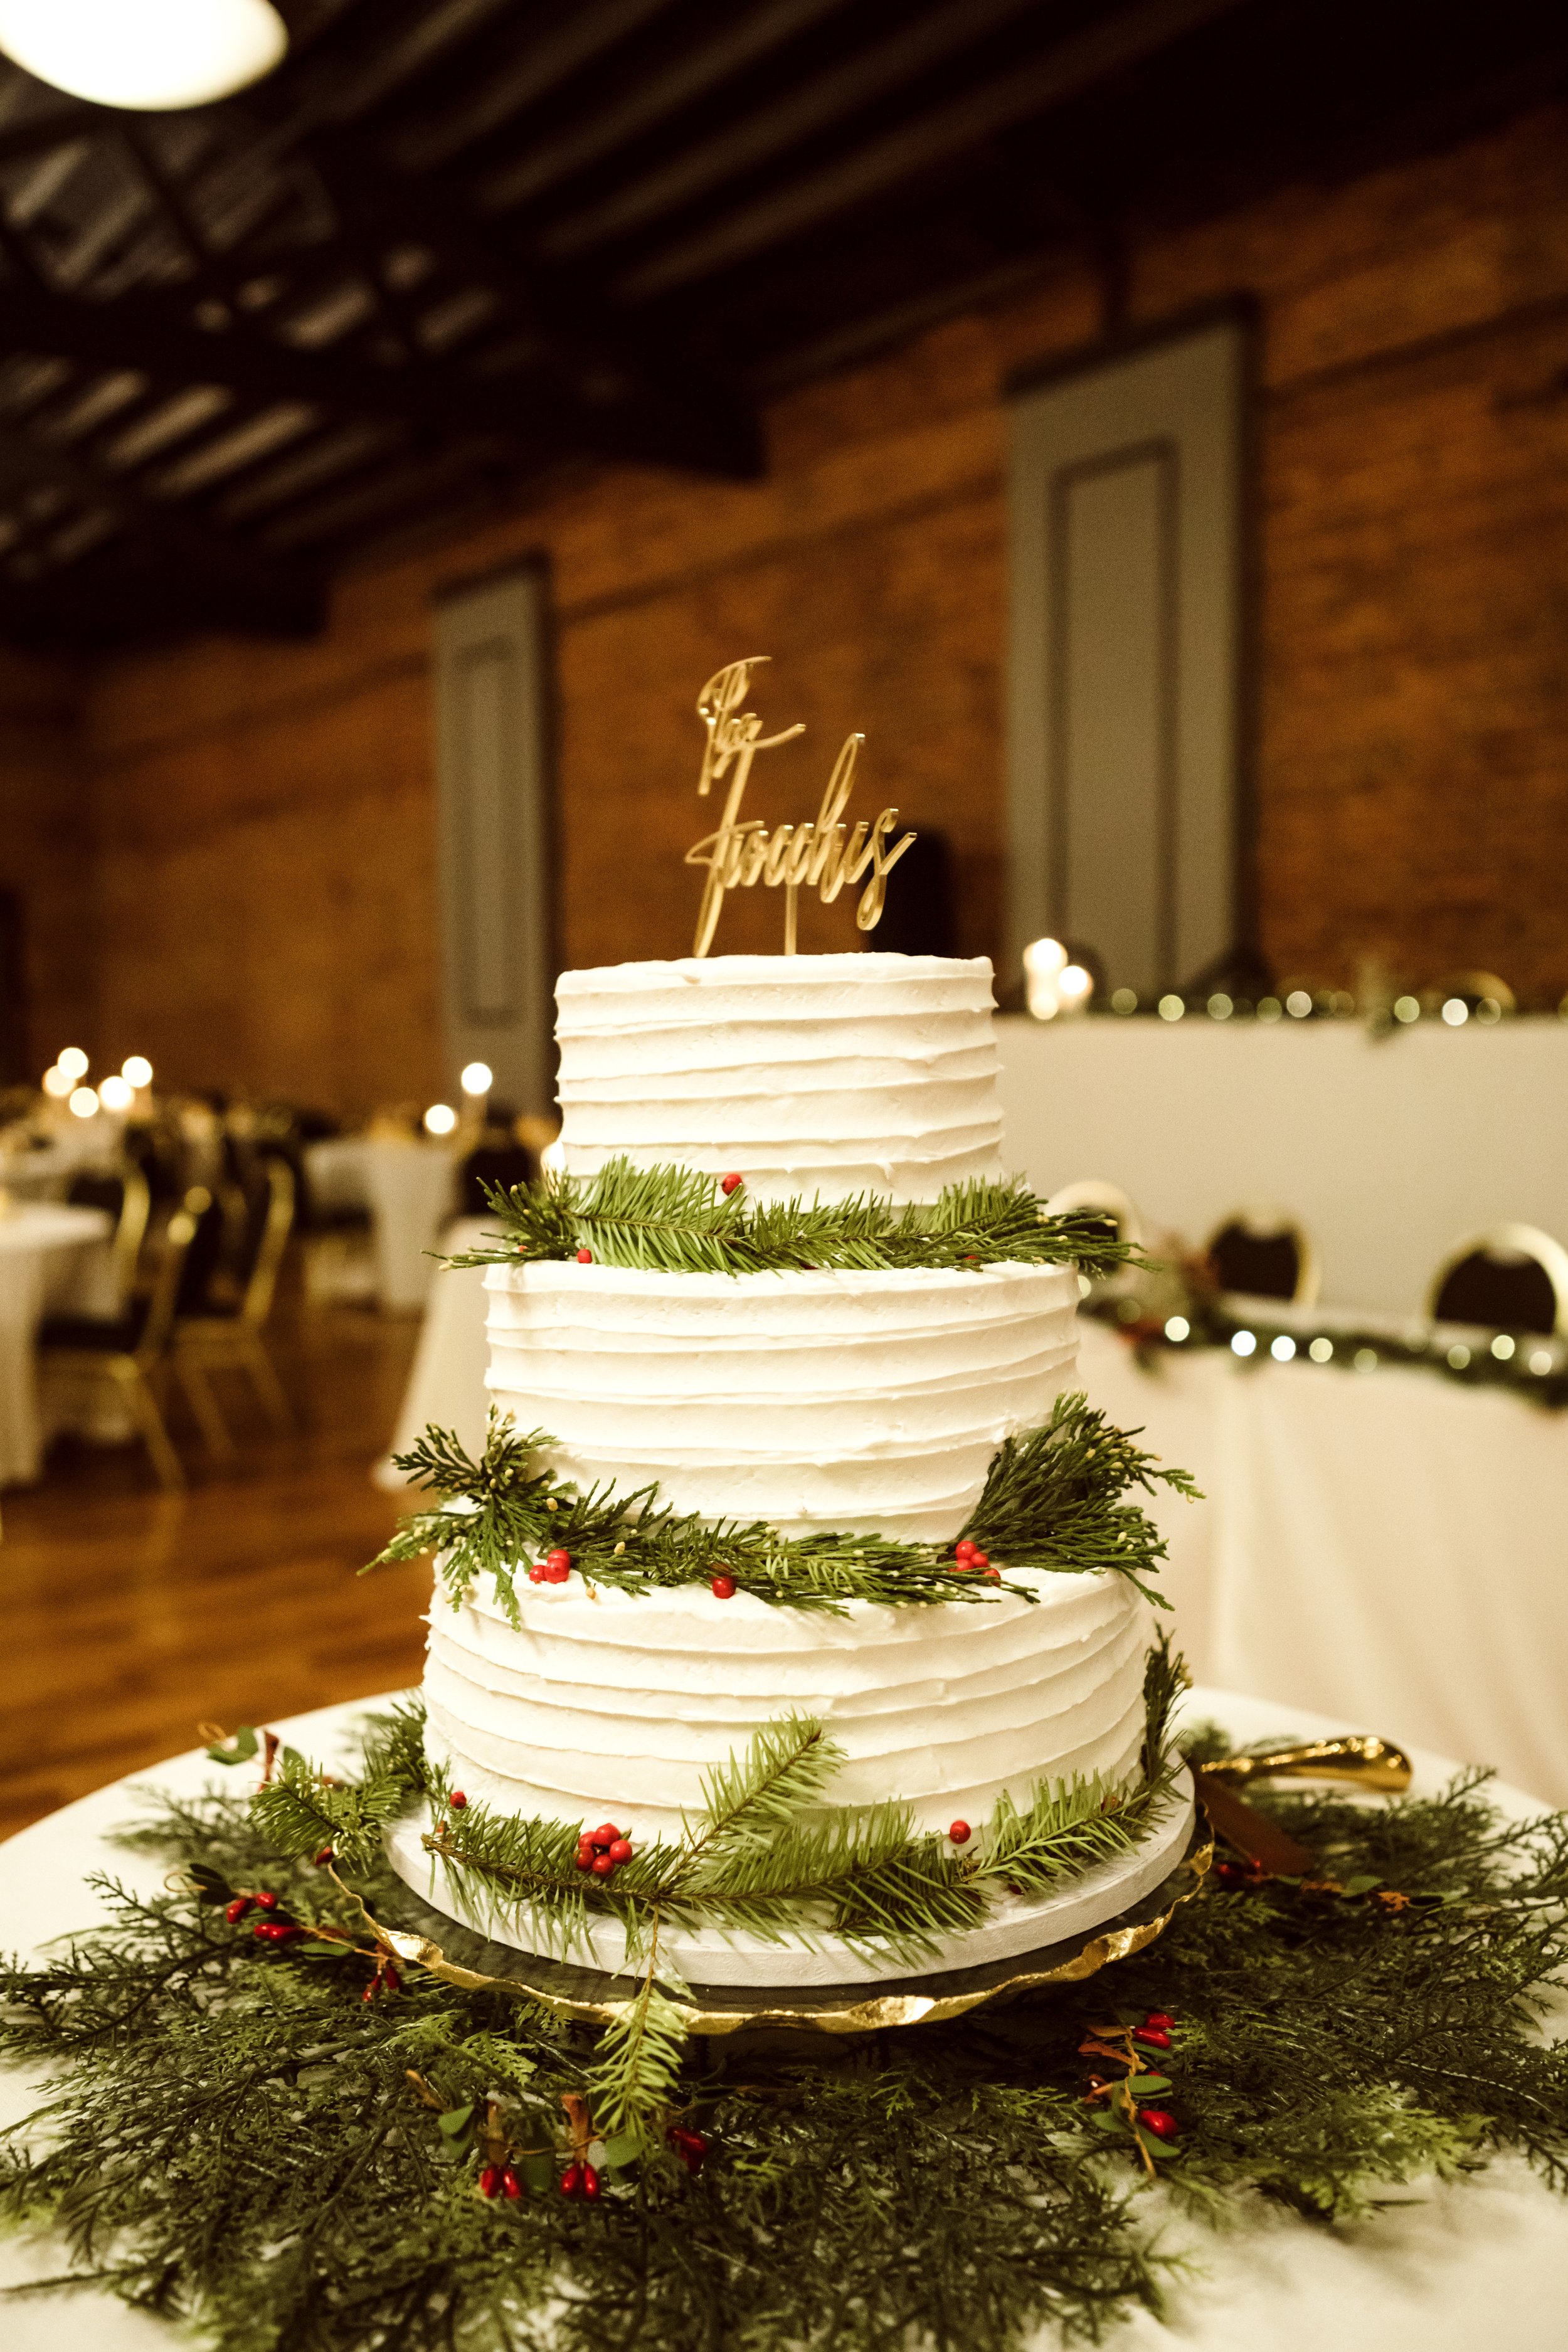  Three-tier buttercream wedding cake with winter greenery by Teala Ward Photography. winter wedding cake three tier simple #TealaWardPhotography #TealaWardWeddings #LaSalleWedding #churchwedding #Illinoisweddingphotographer #LaSalle,IL 